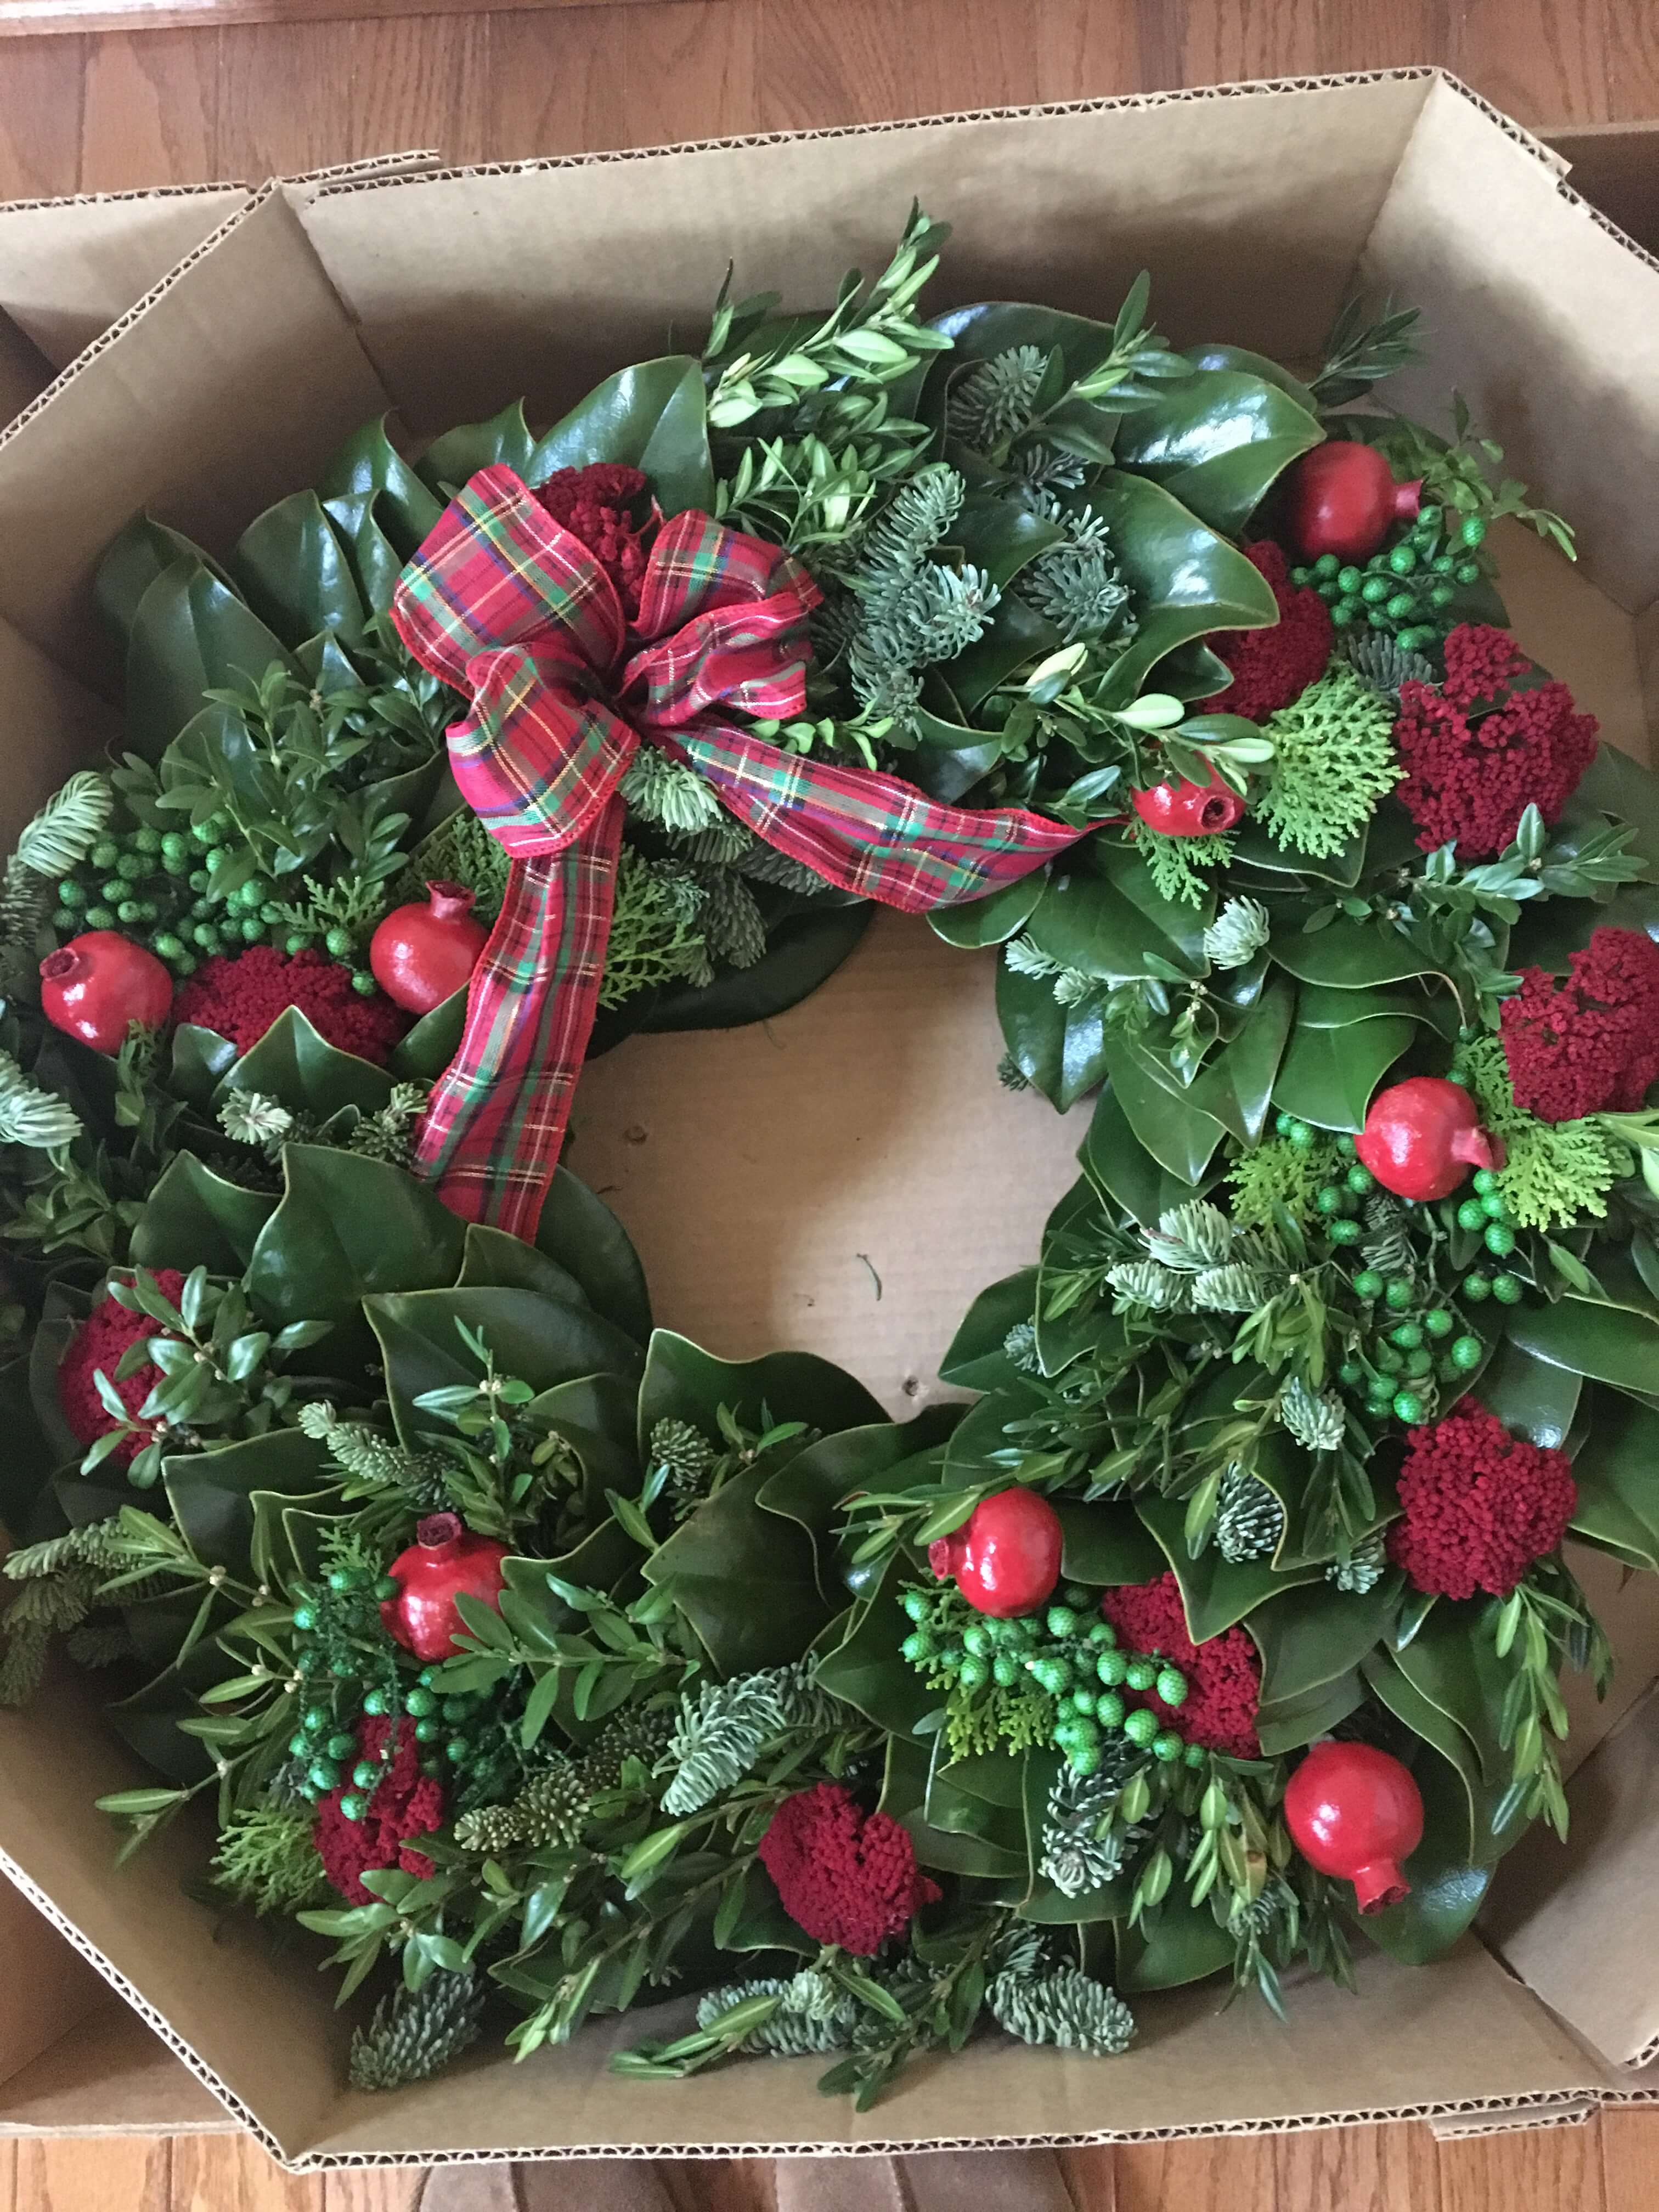 A Lovely Assortment of Greens in a Wreath!